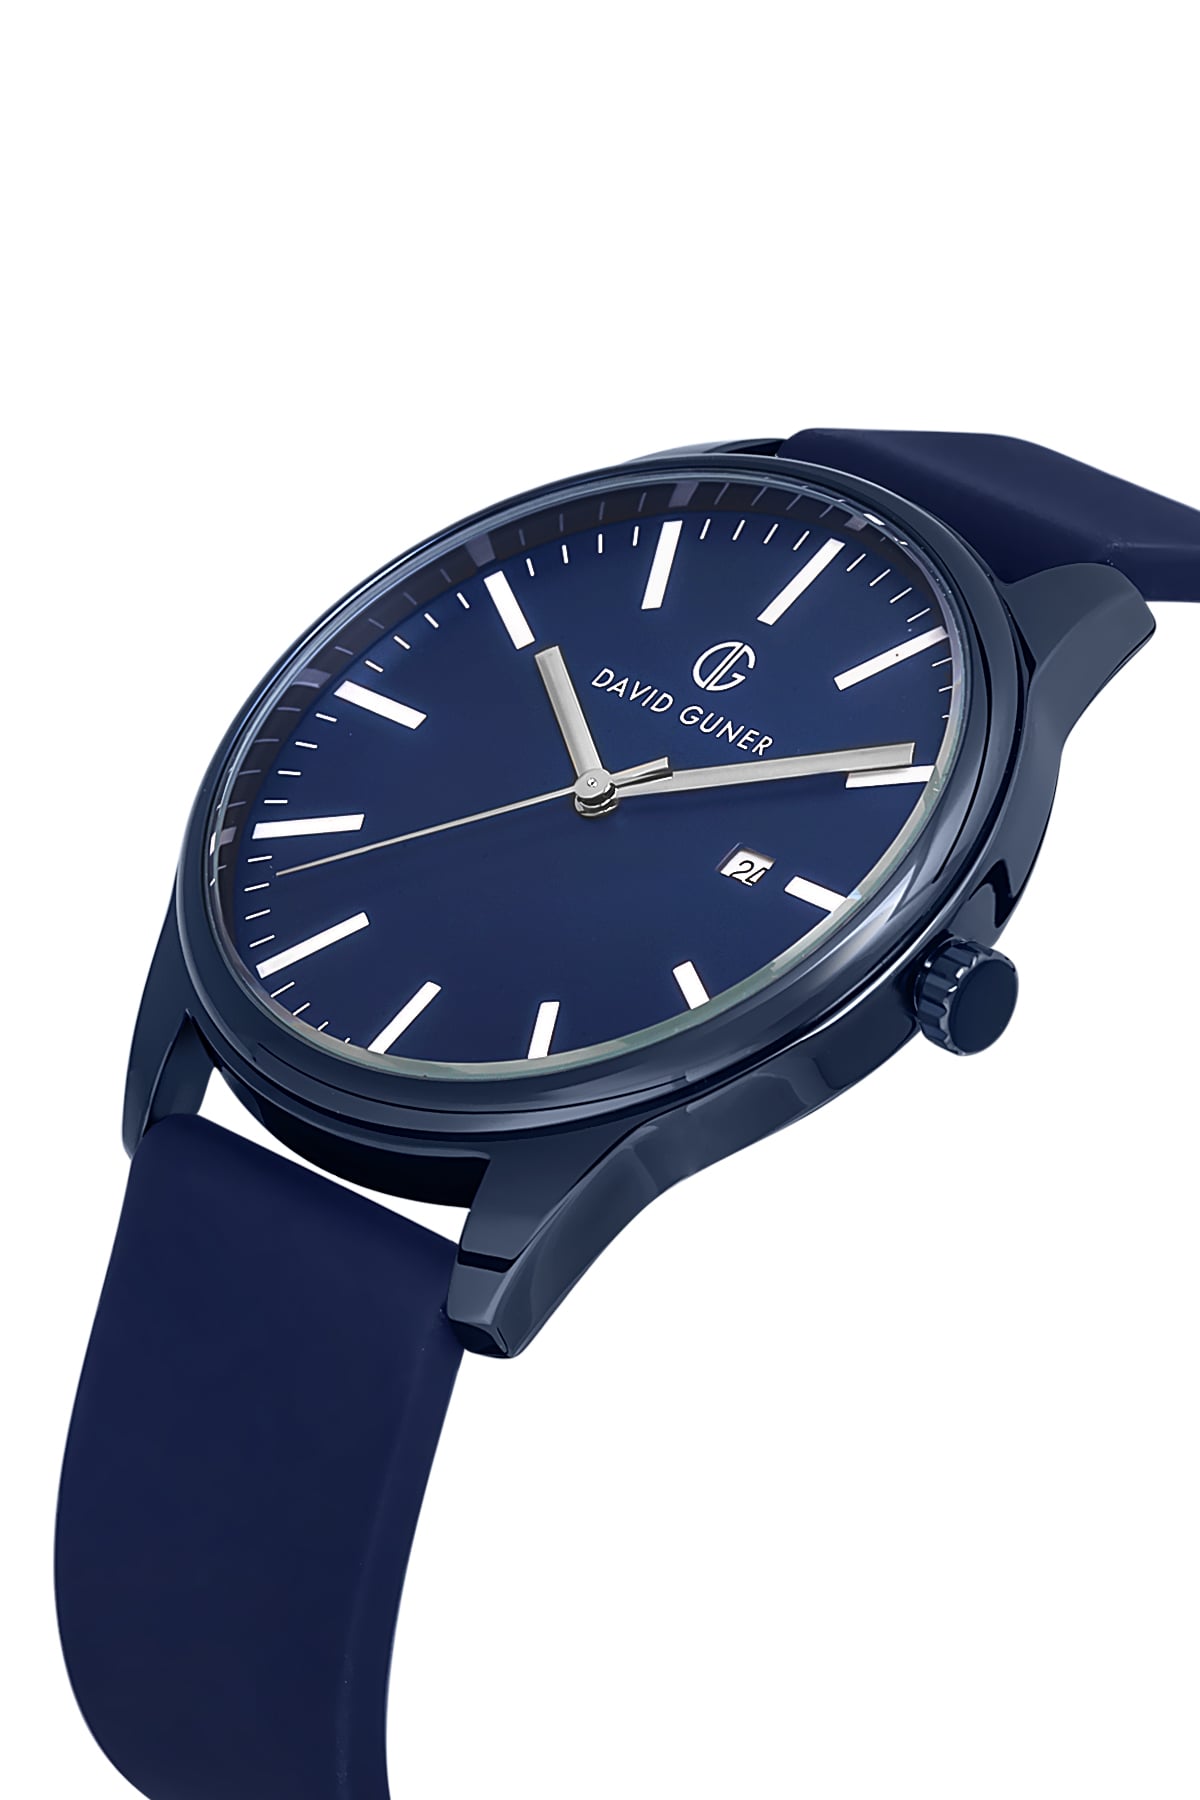 DAVID GUNER Navy Blue Coated Men's Wristwatch with Calendar and Navy Blue Silicone Strap